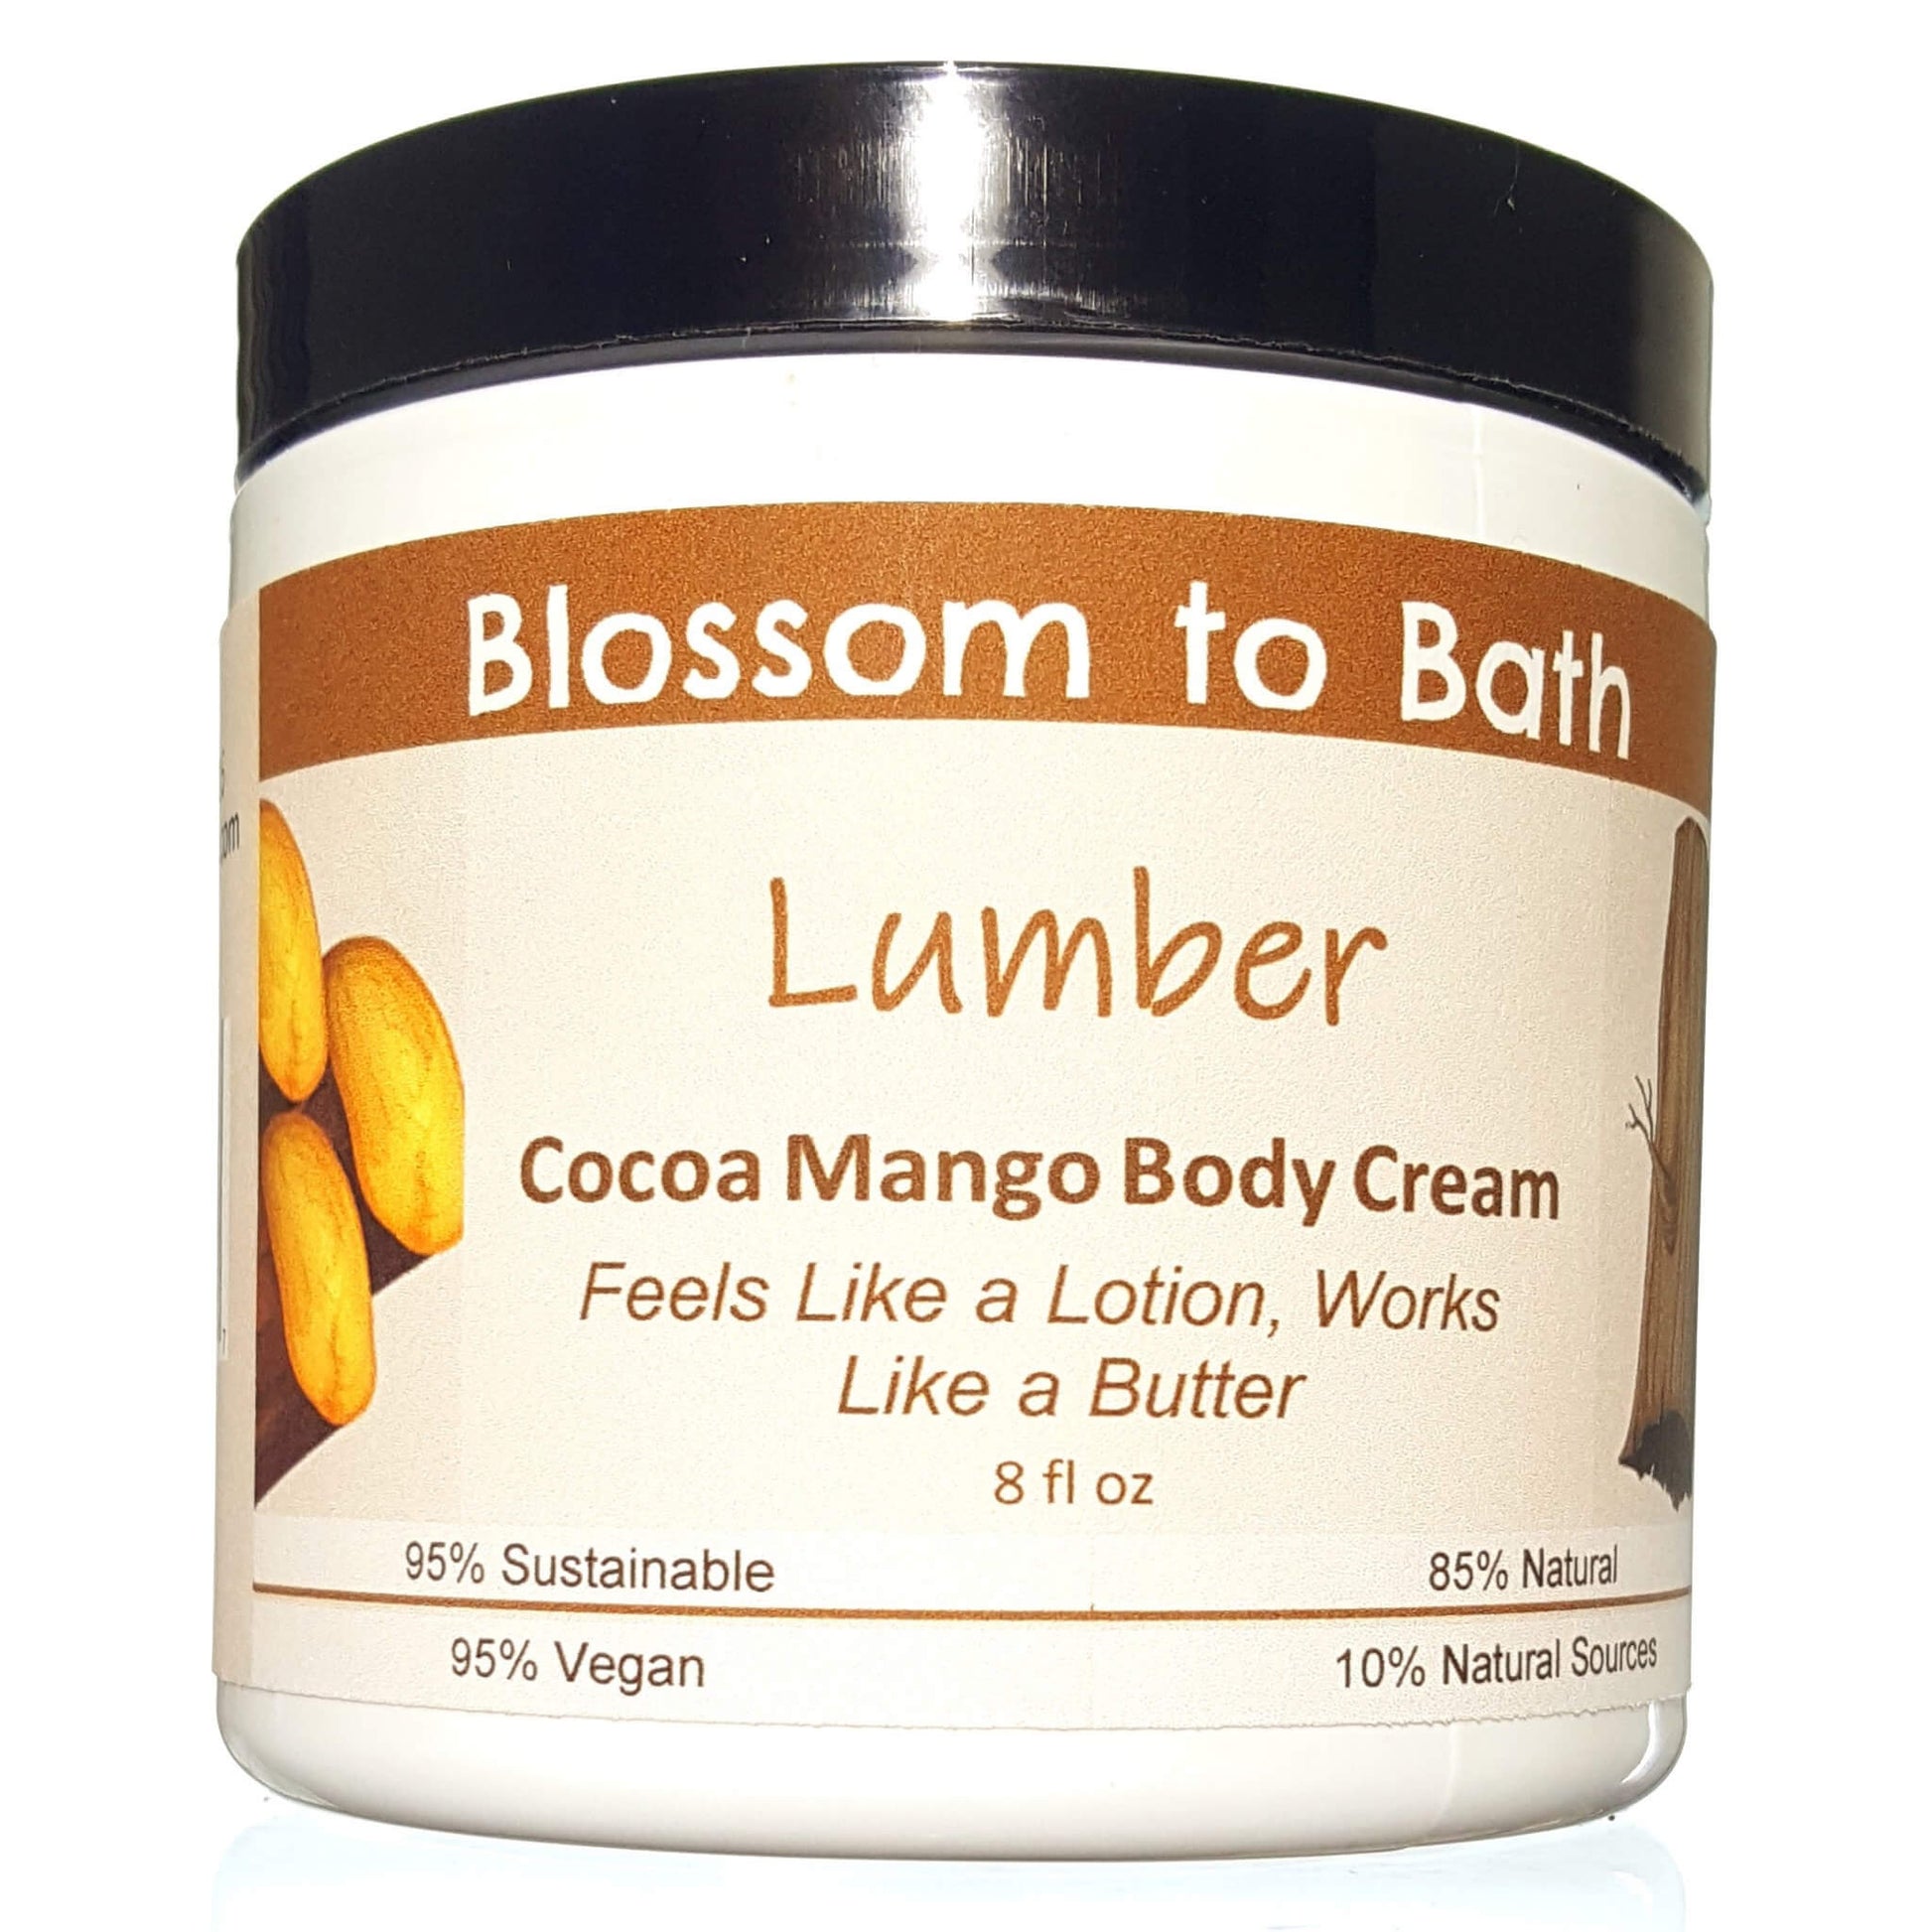 Buy Blossom to Bath Lumber Cocoa Mango Body Cream from Flowersong Soap Studio.  Rich organic butters  soften and moisturize even the roughest skin all day  A masculine fragrance that echoes fresh cut trees.